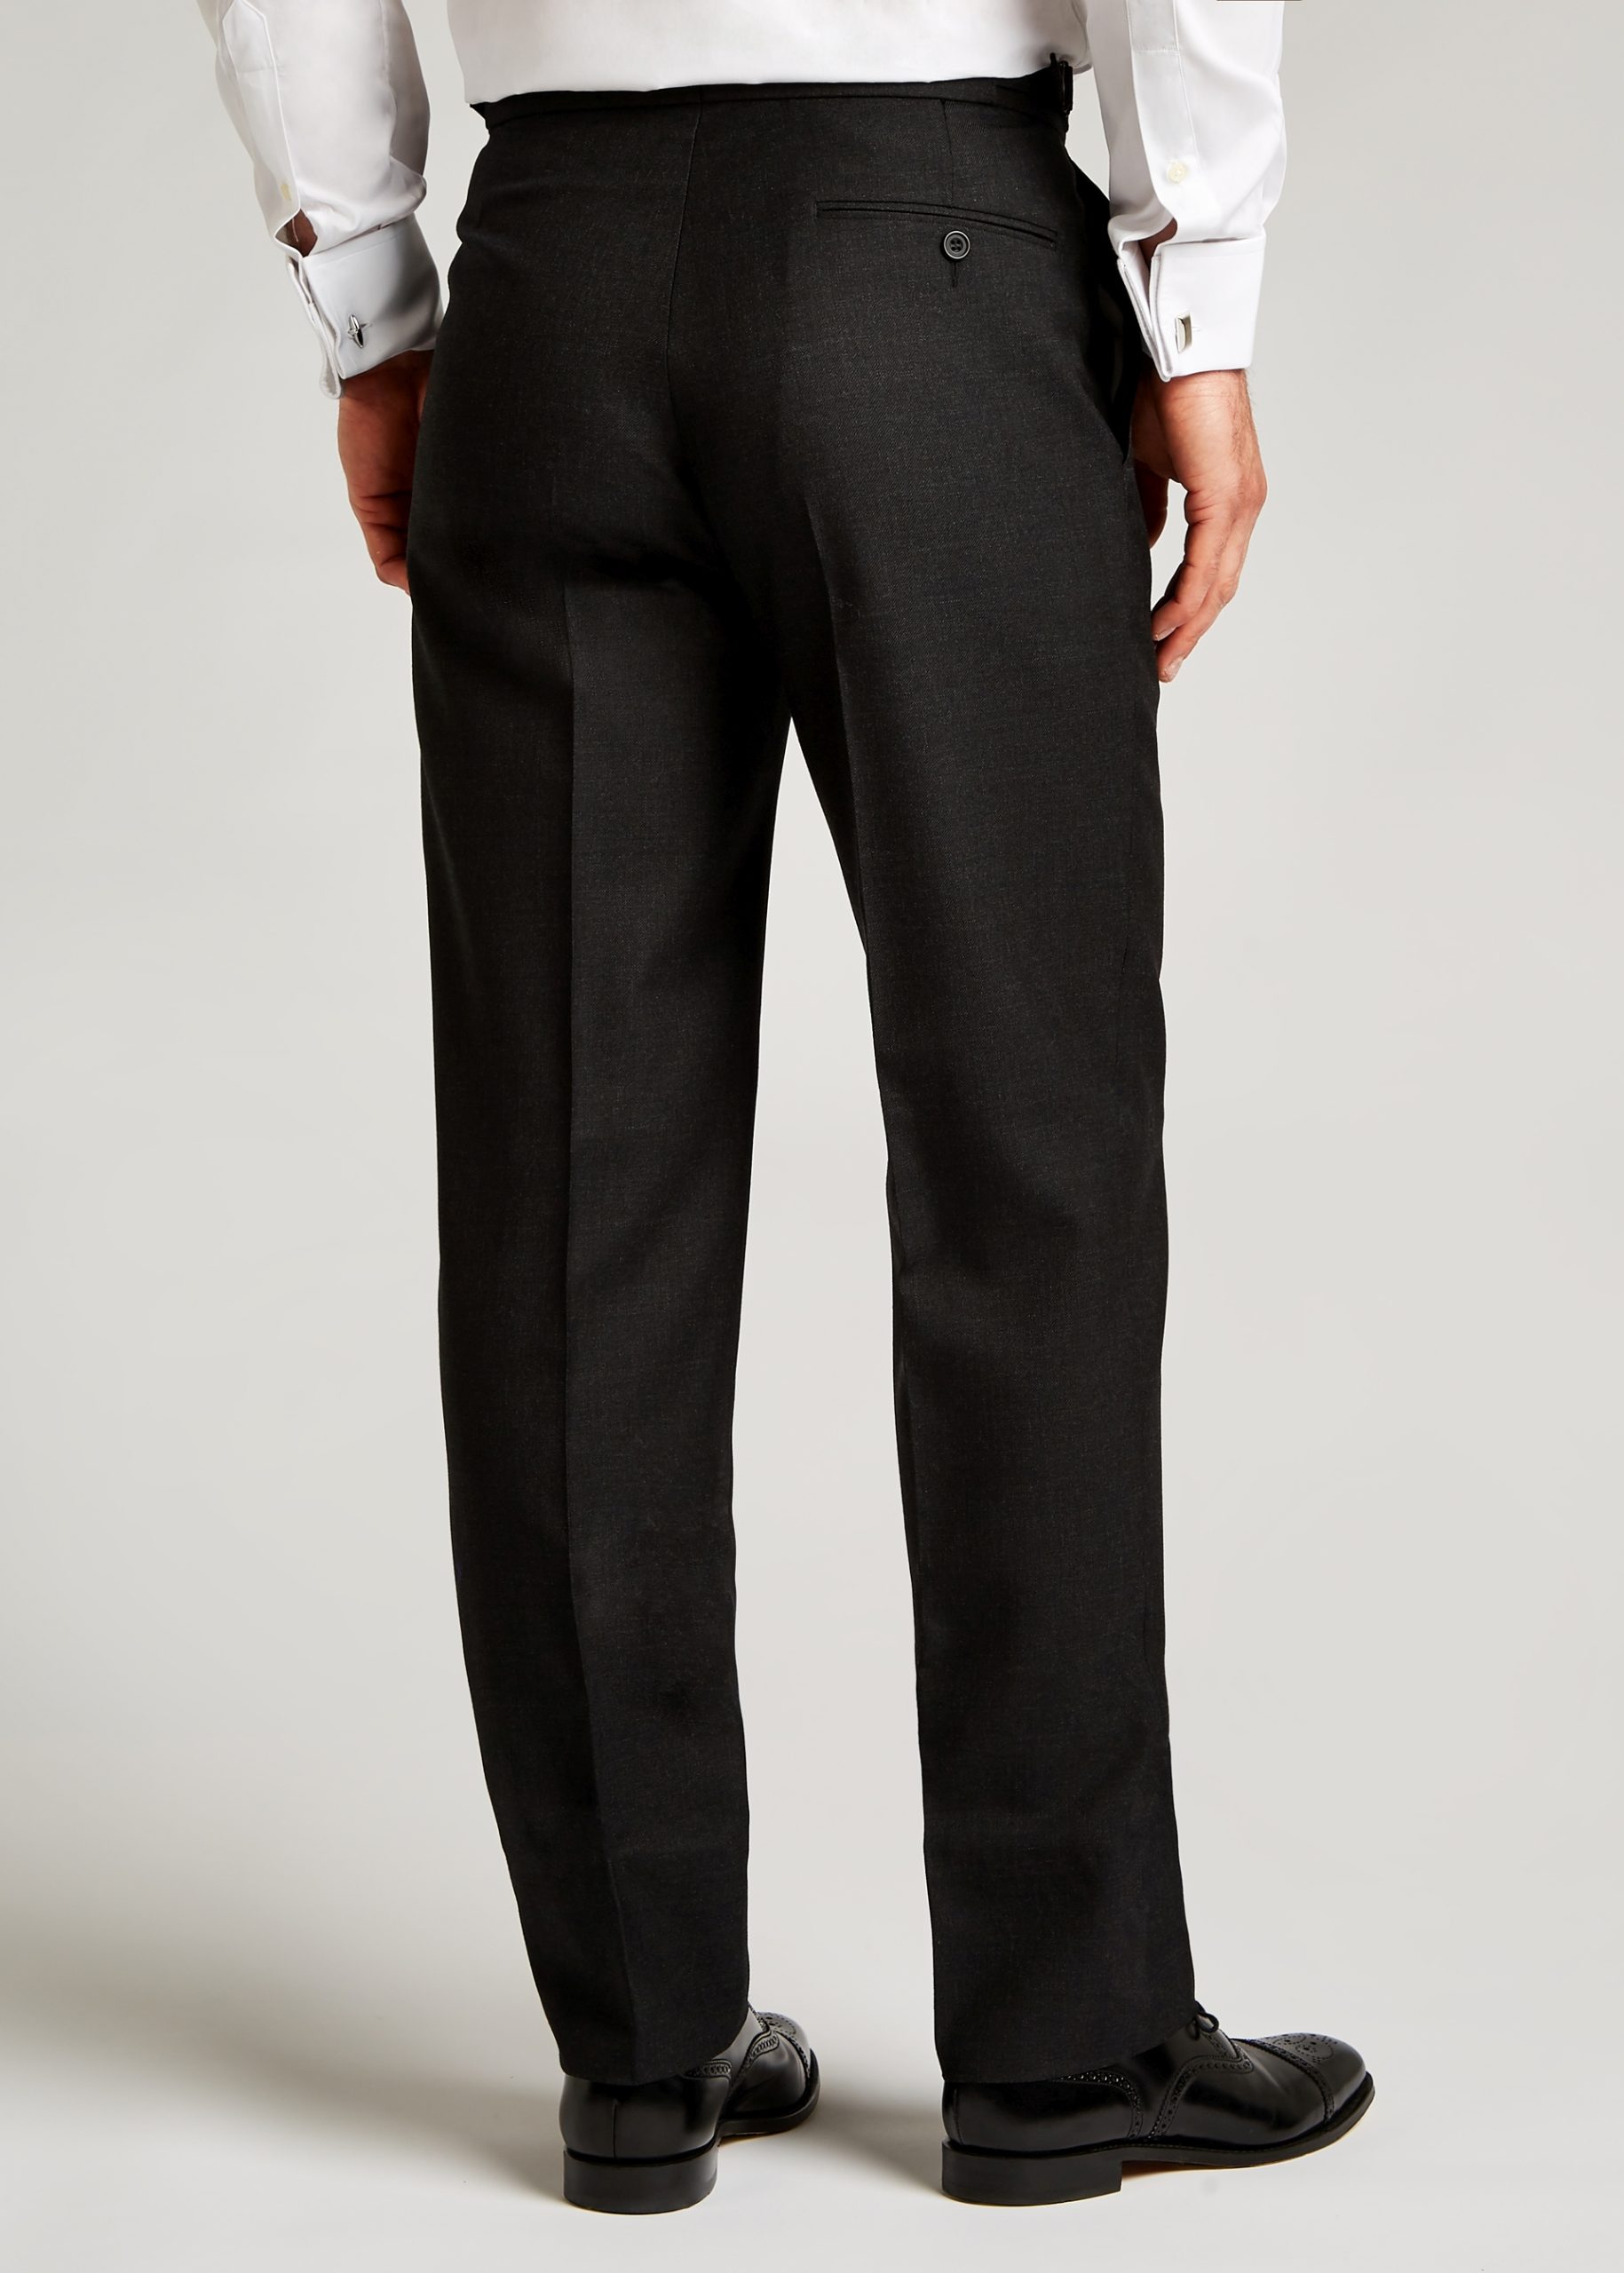 Roderick Charles pic and pic suit in charcoal grey with straight pockets